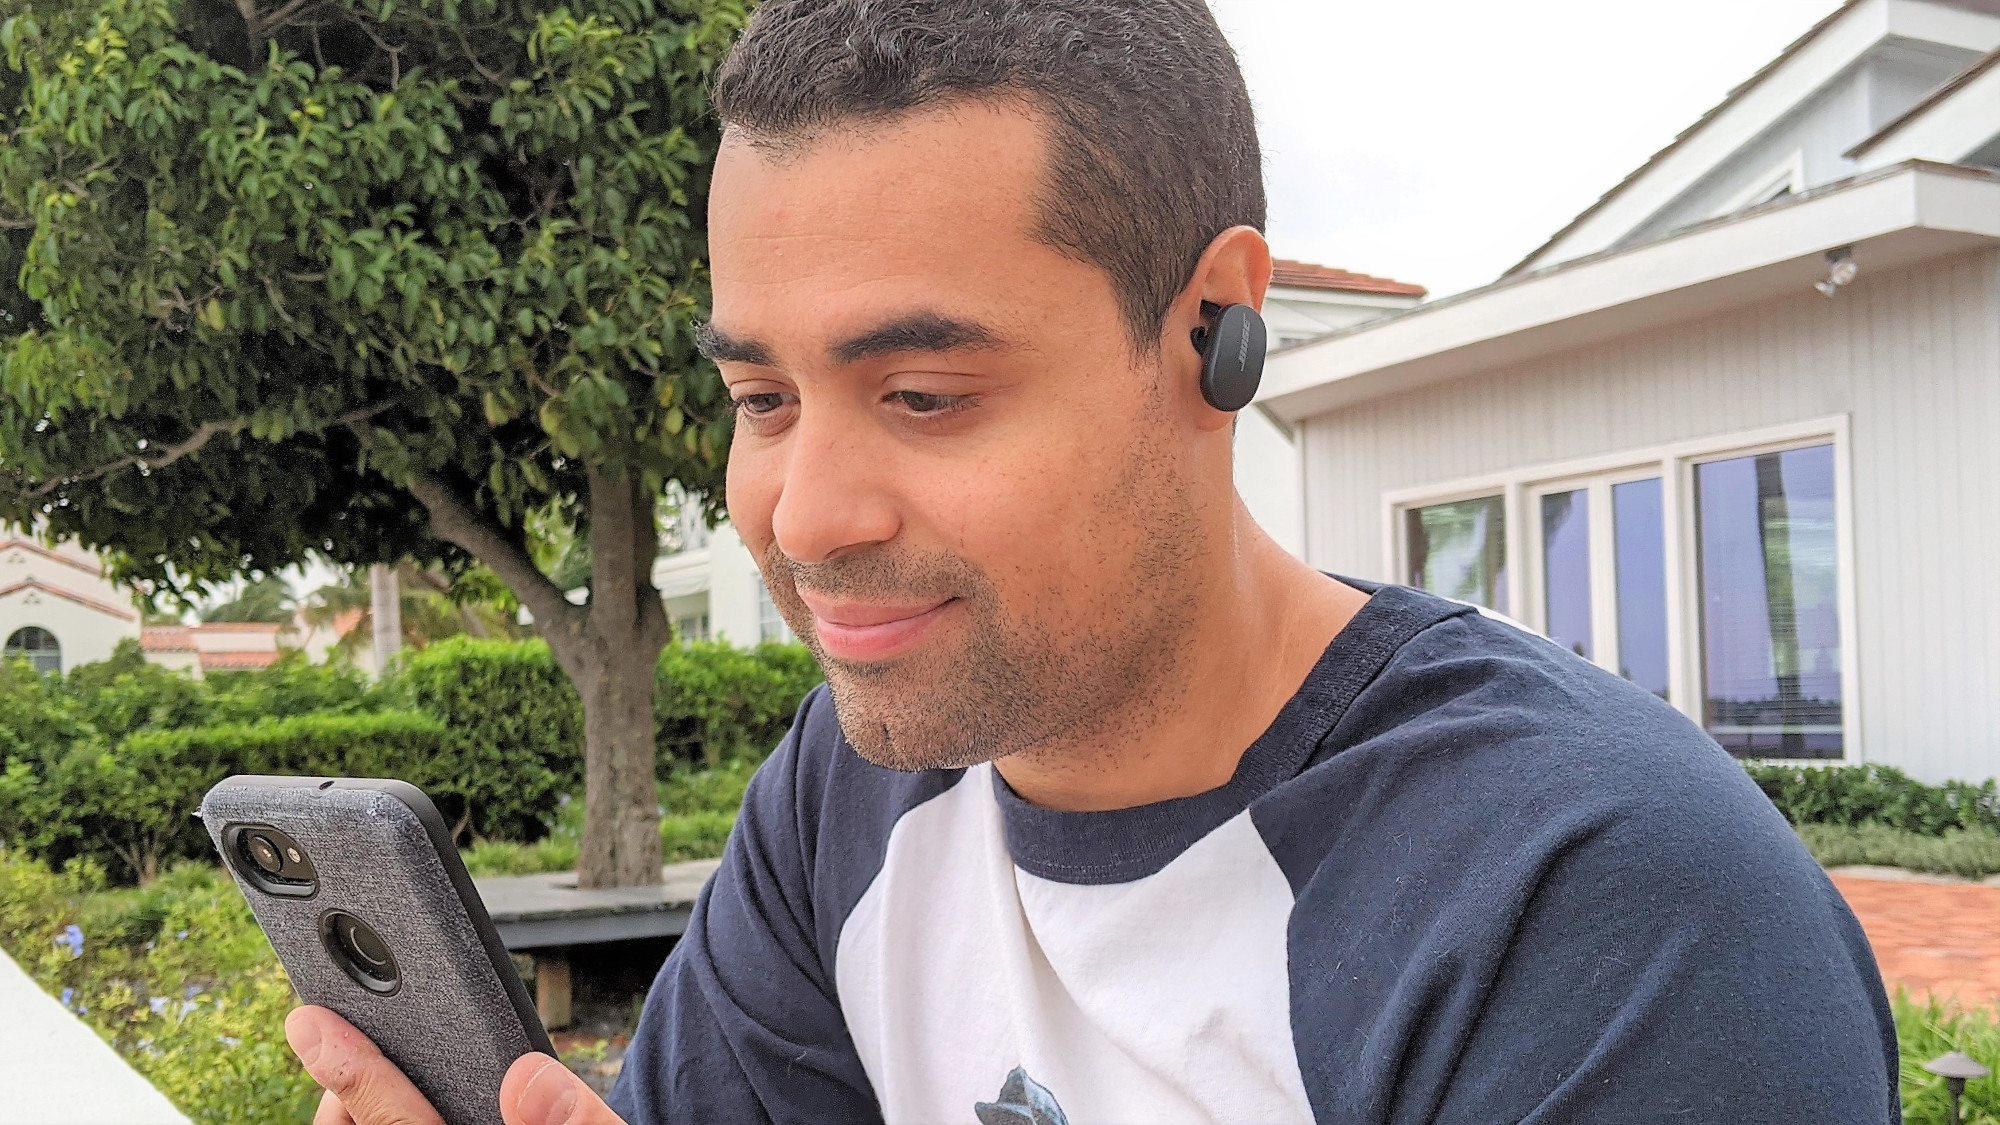 Bose QuietComfort Earbuds worn by Alex Bracetti testing call quality